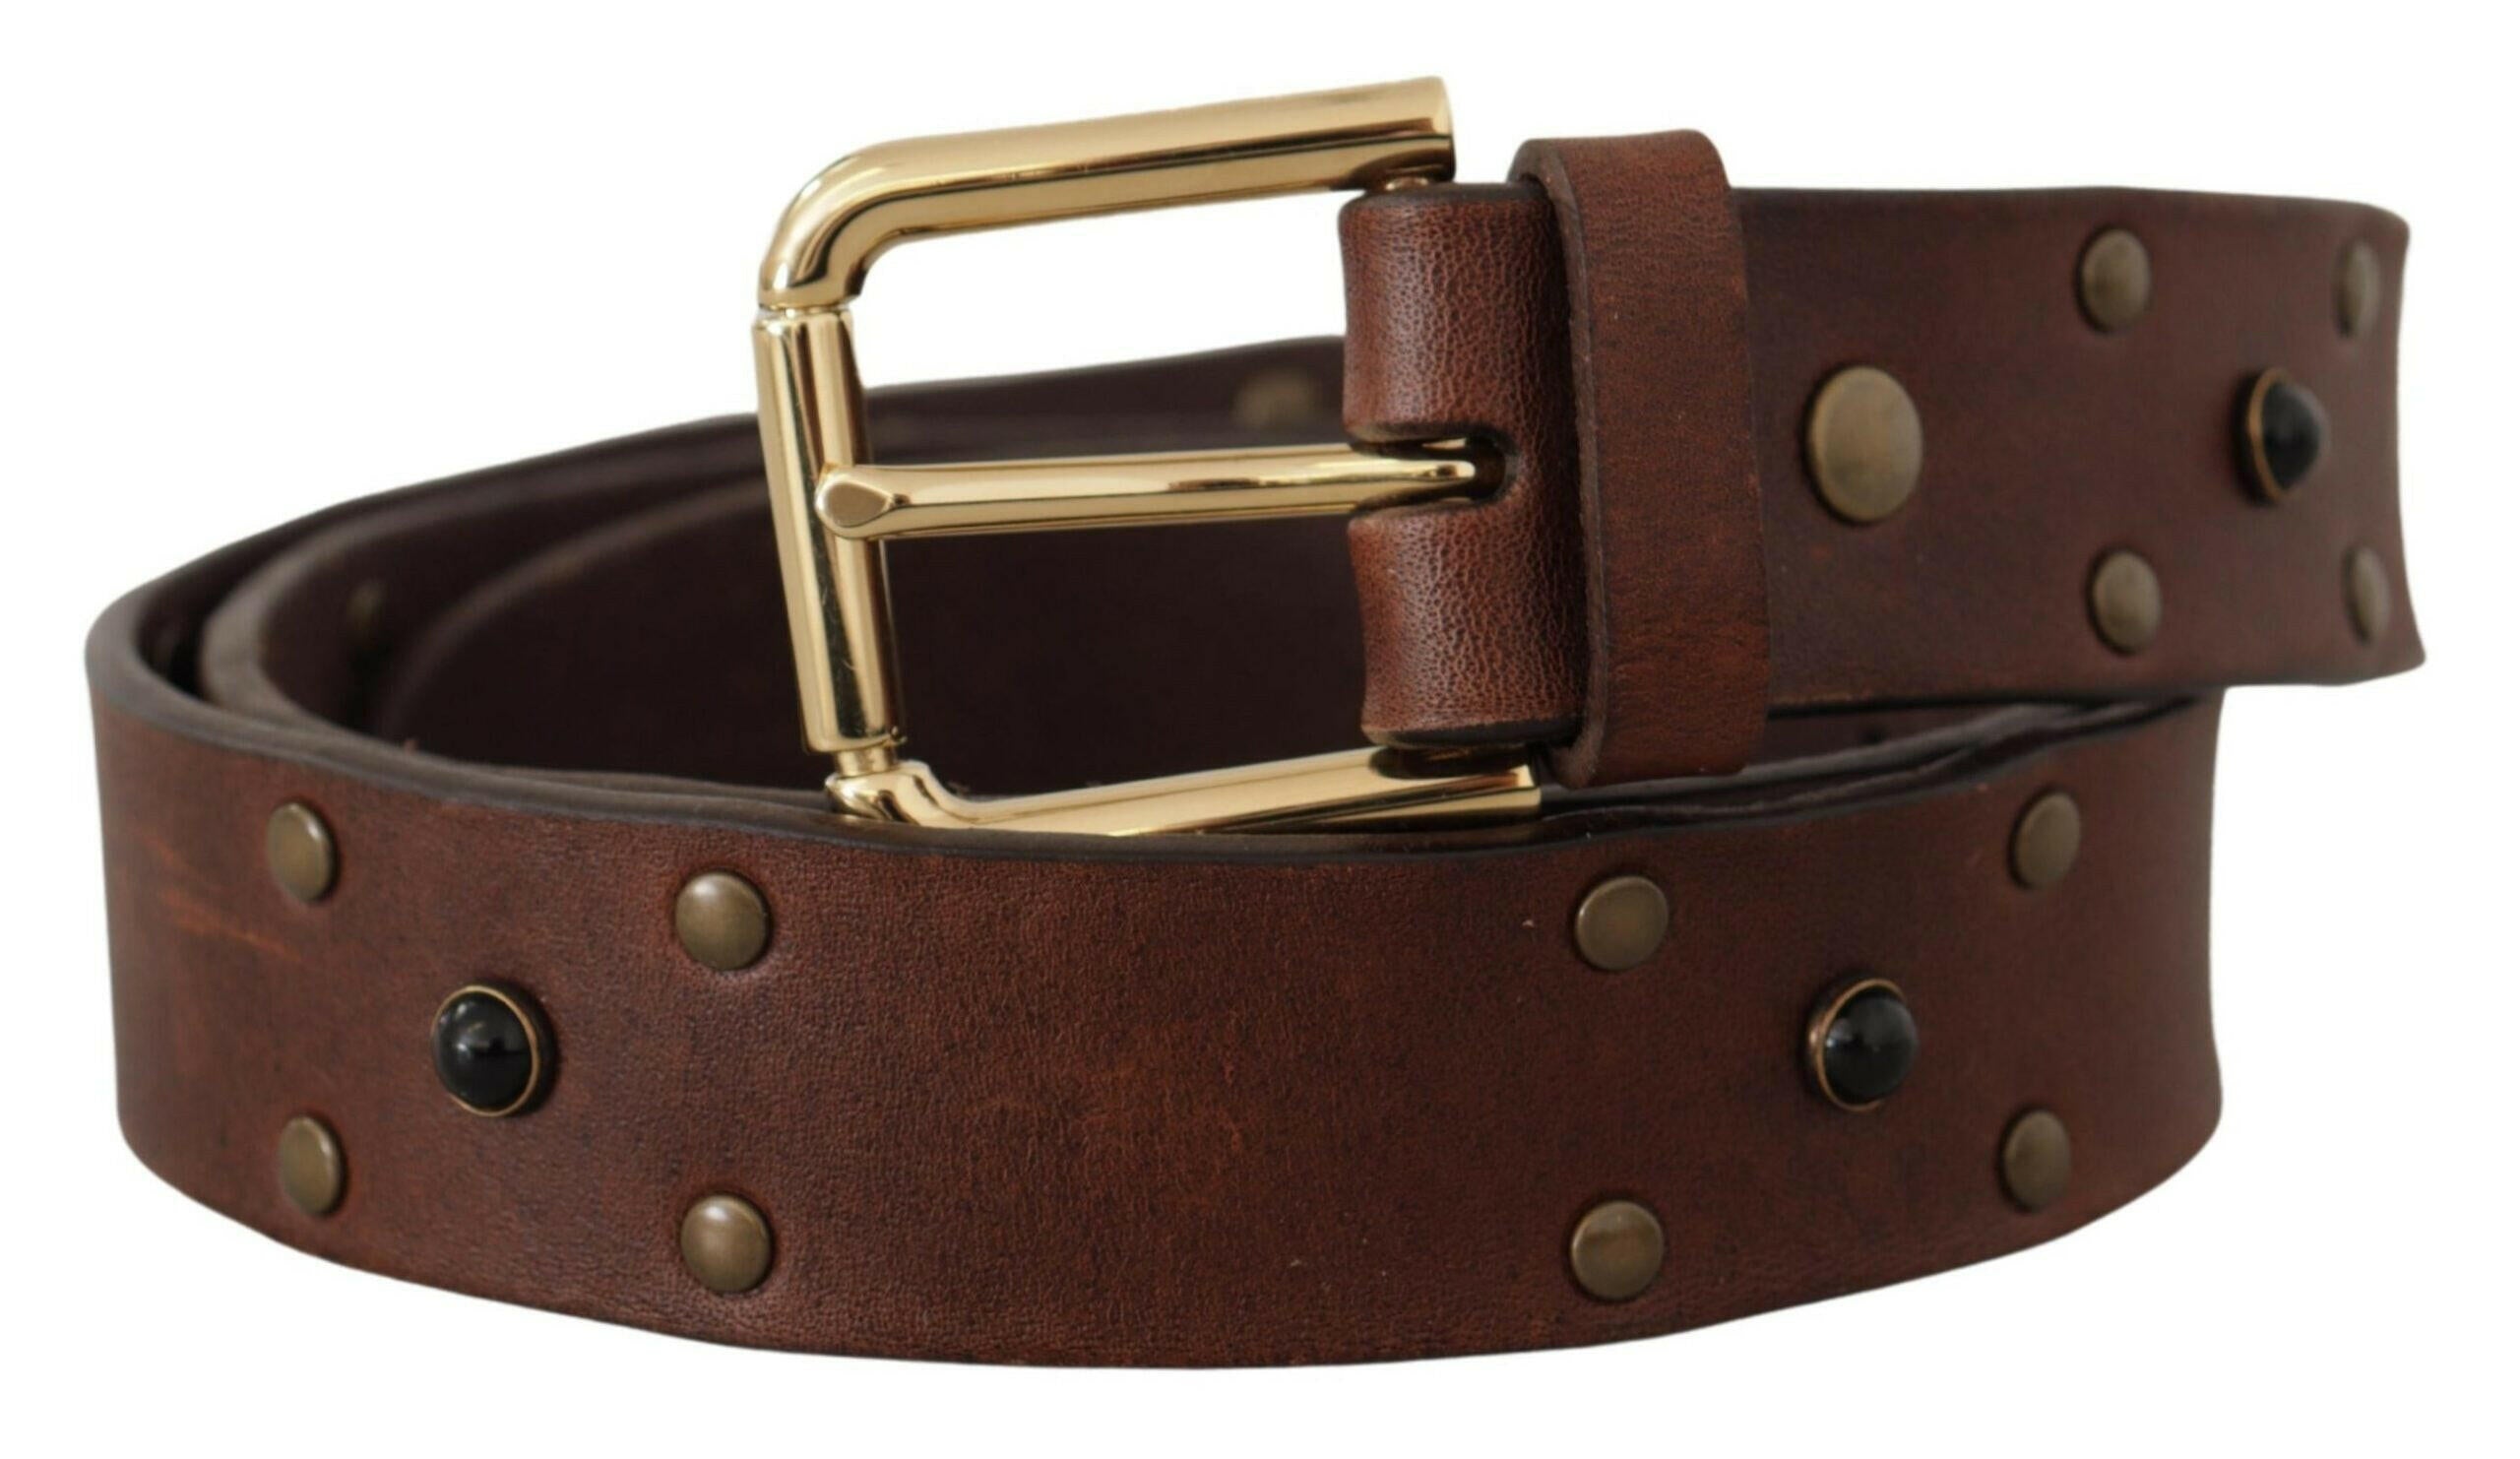 Dolce & Gabbana Brown Leather Studded Gold Tone Metal Buckle Belt - GENUINE AUTHENTIC BRAND LLC  